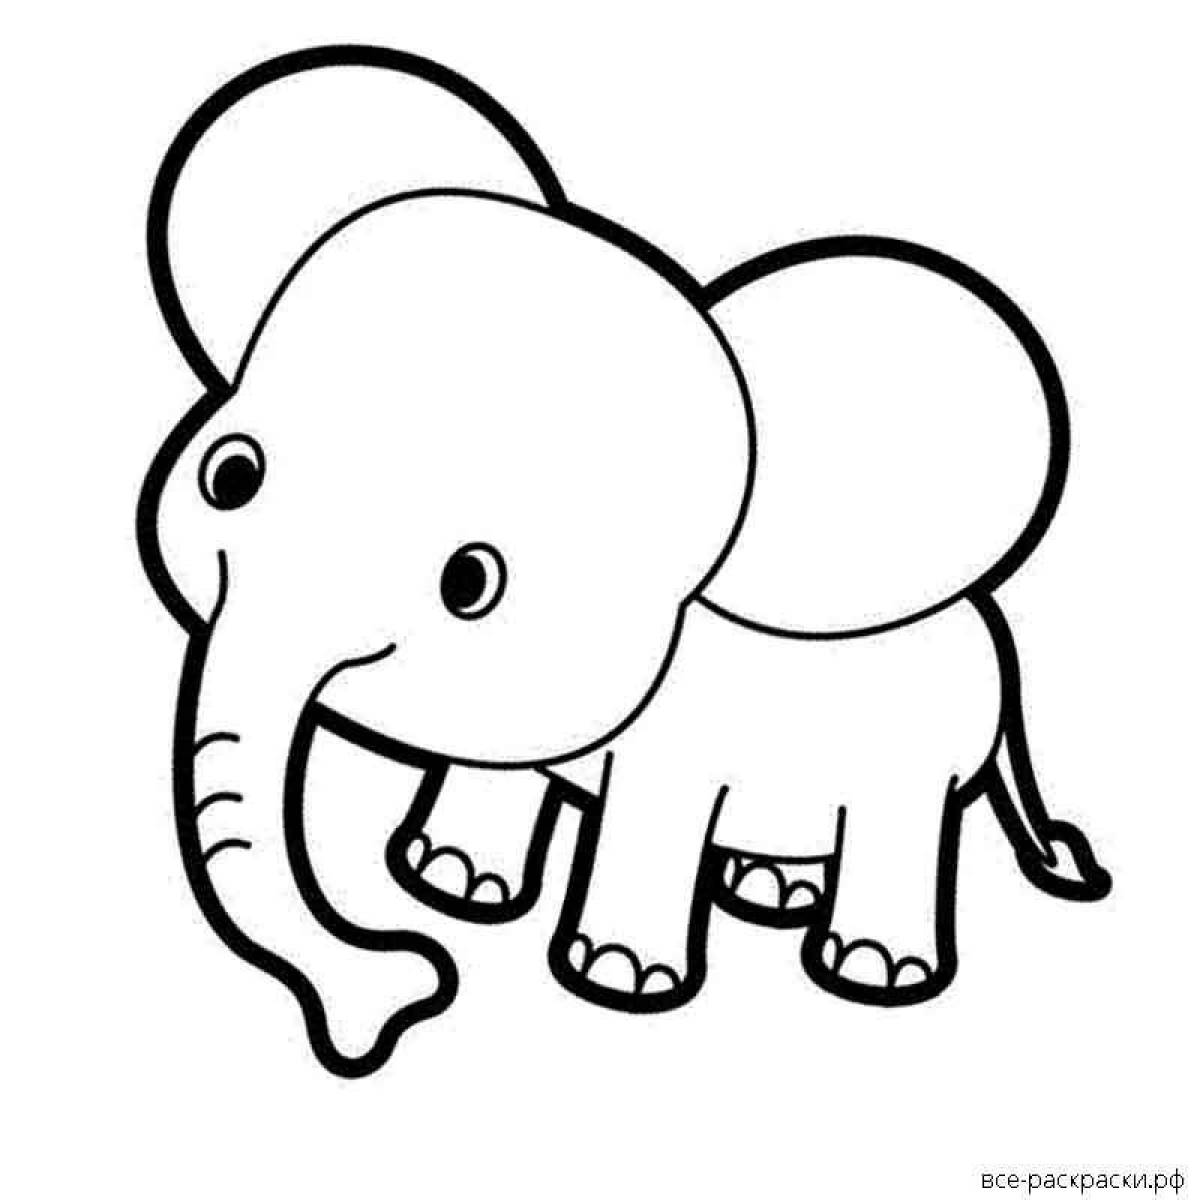 Colourful coloring of an elephant for children 3-4 years old